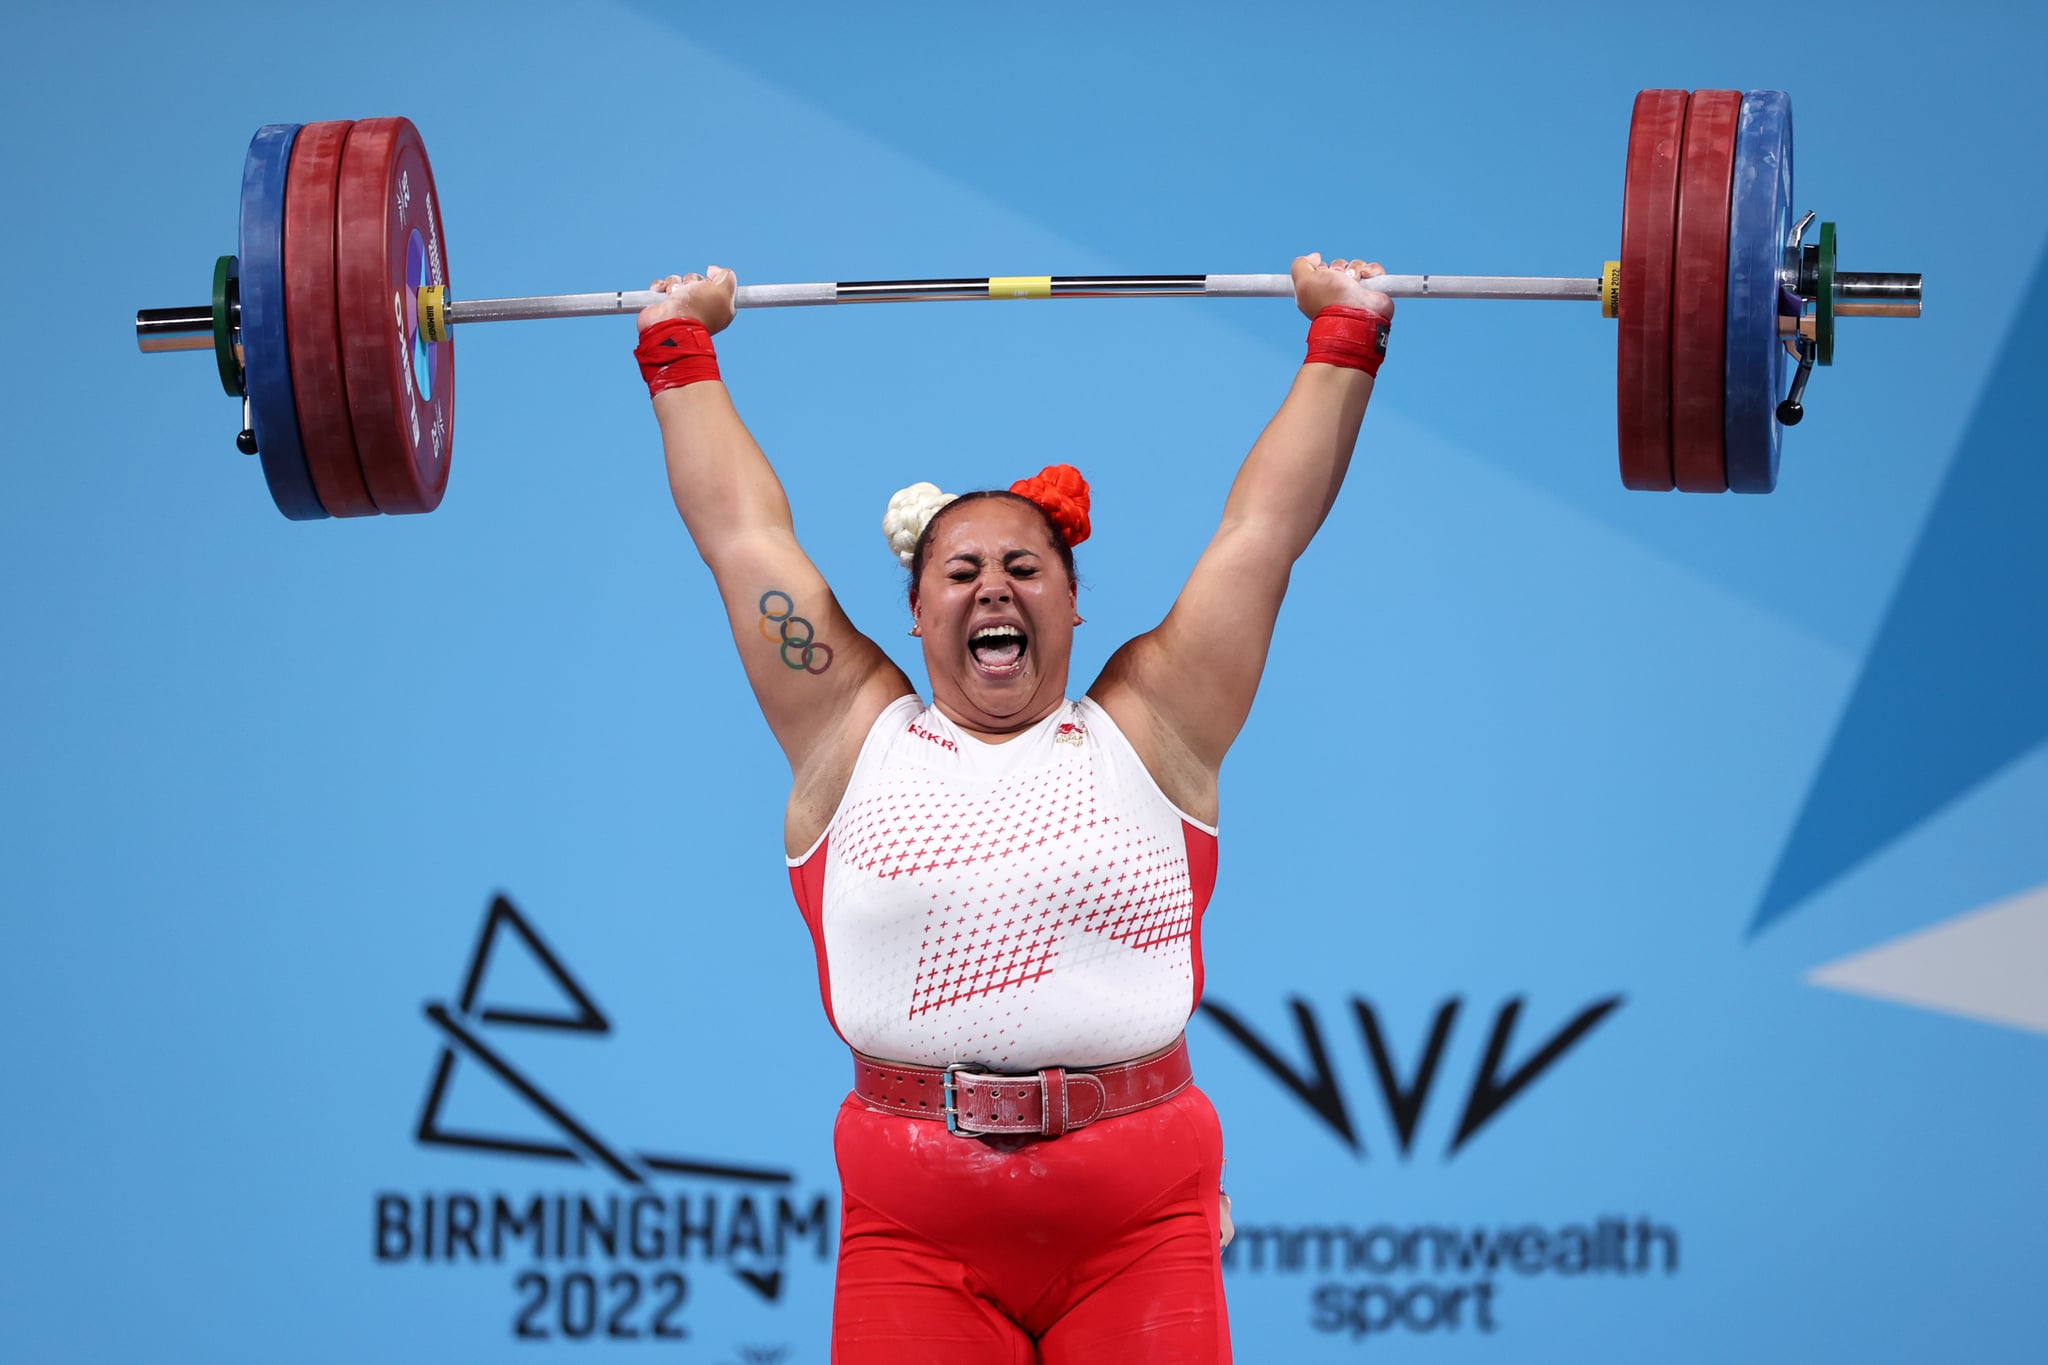 BIRMINGHAM, ENGLAND - AUGUST 03: Emily Campbell of Team England reacts as she performs a clean & jerk during the Women's 87+kg Final on day six of the Birmingham 2022 Commonwealth Games at NEC Arena on August 03, 2022 in Birmingham, England. (Photo by Ryan Pierse/Getty Images)